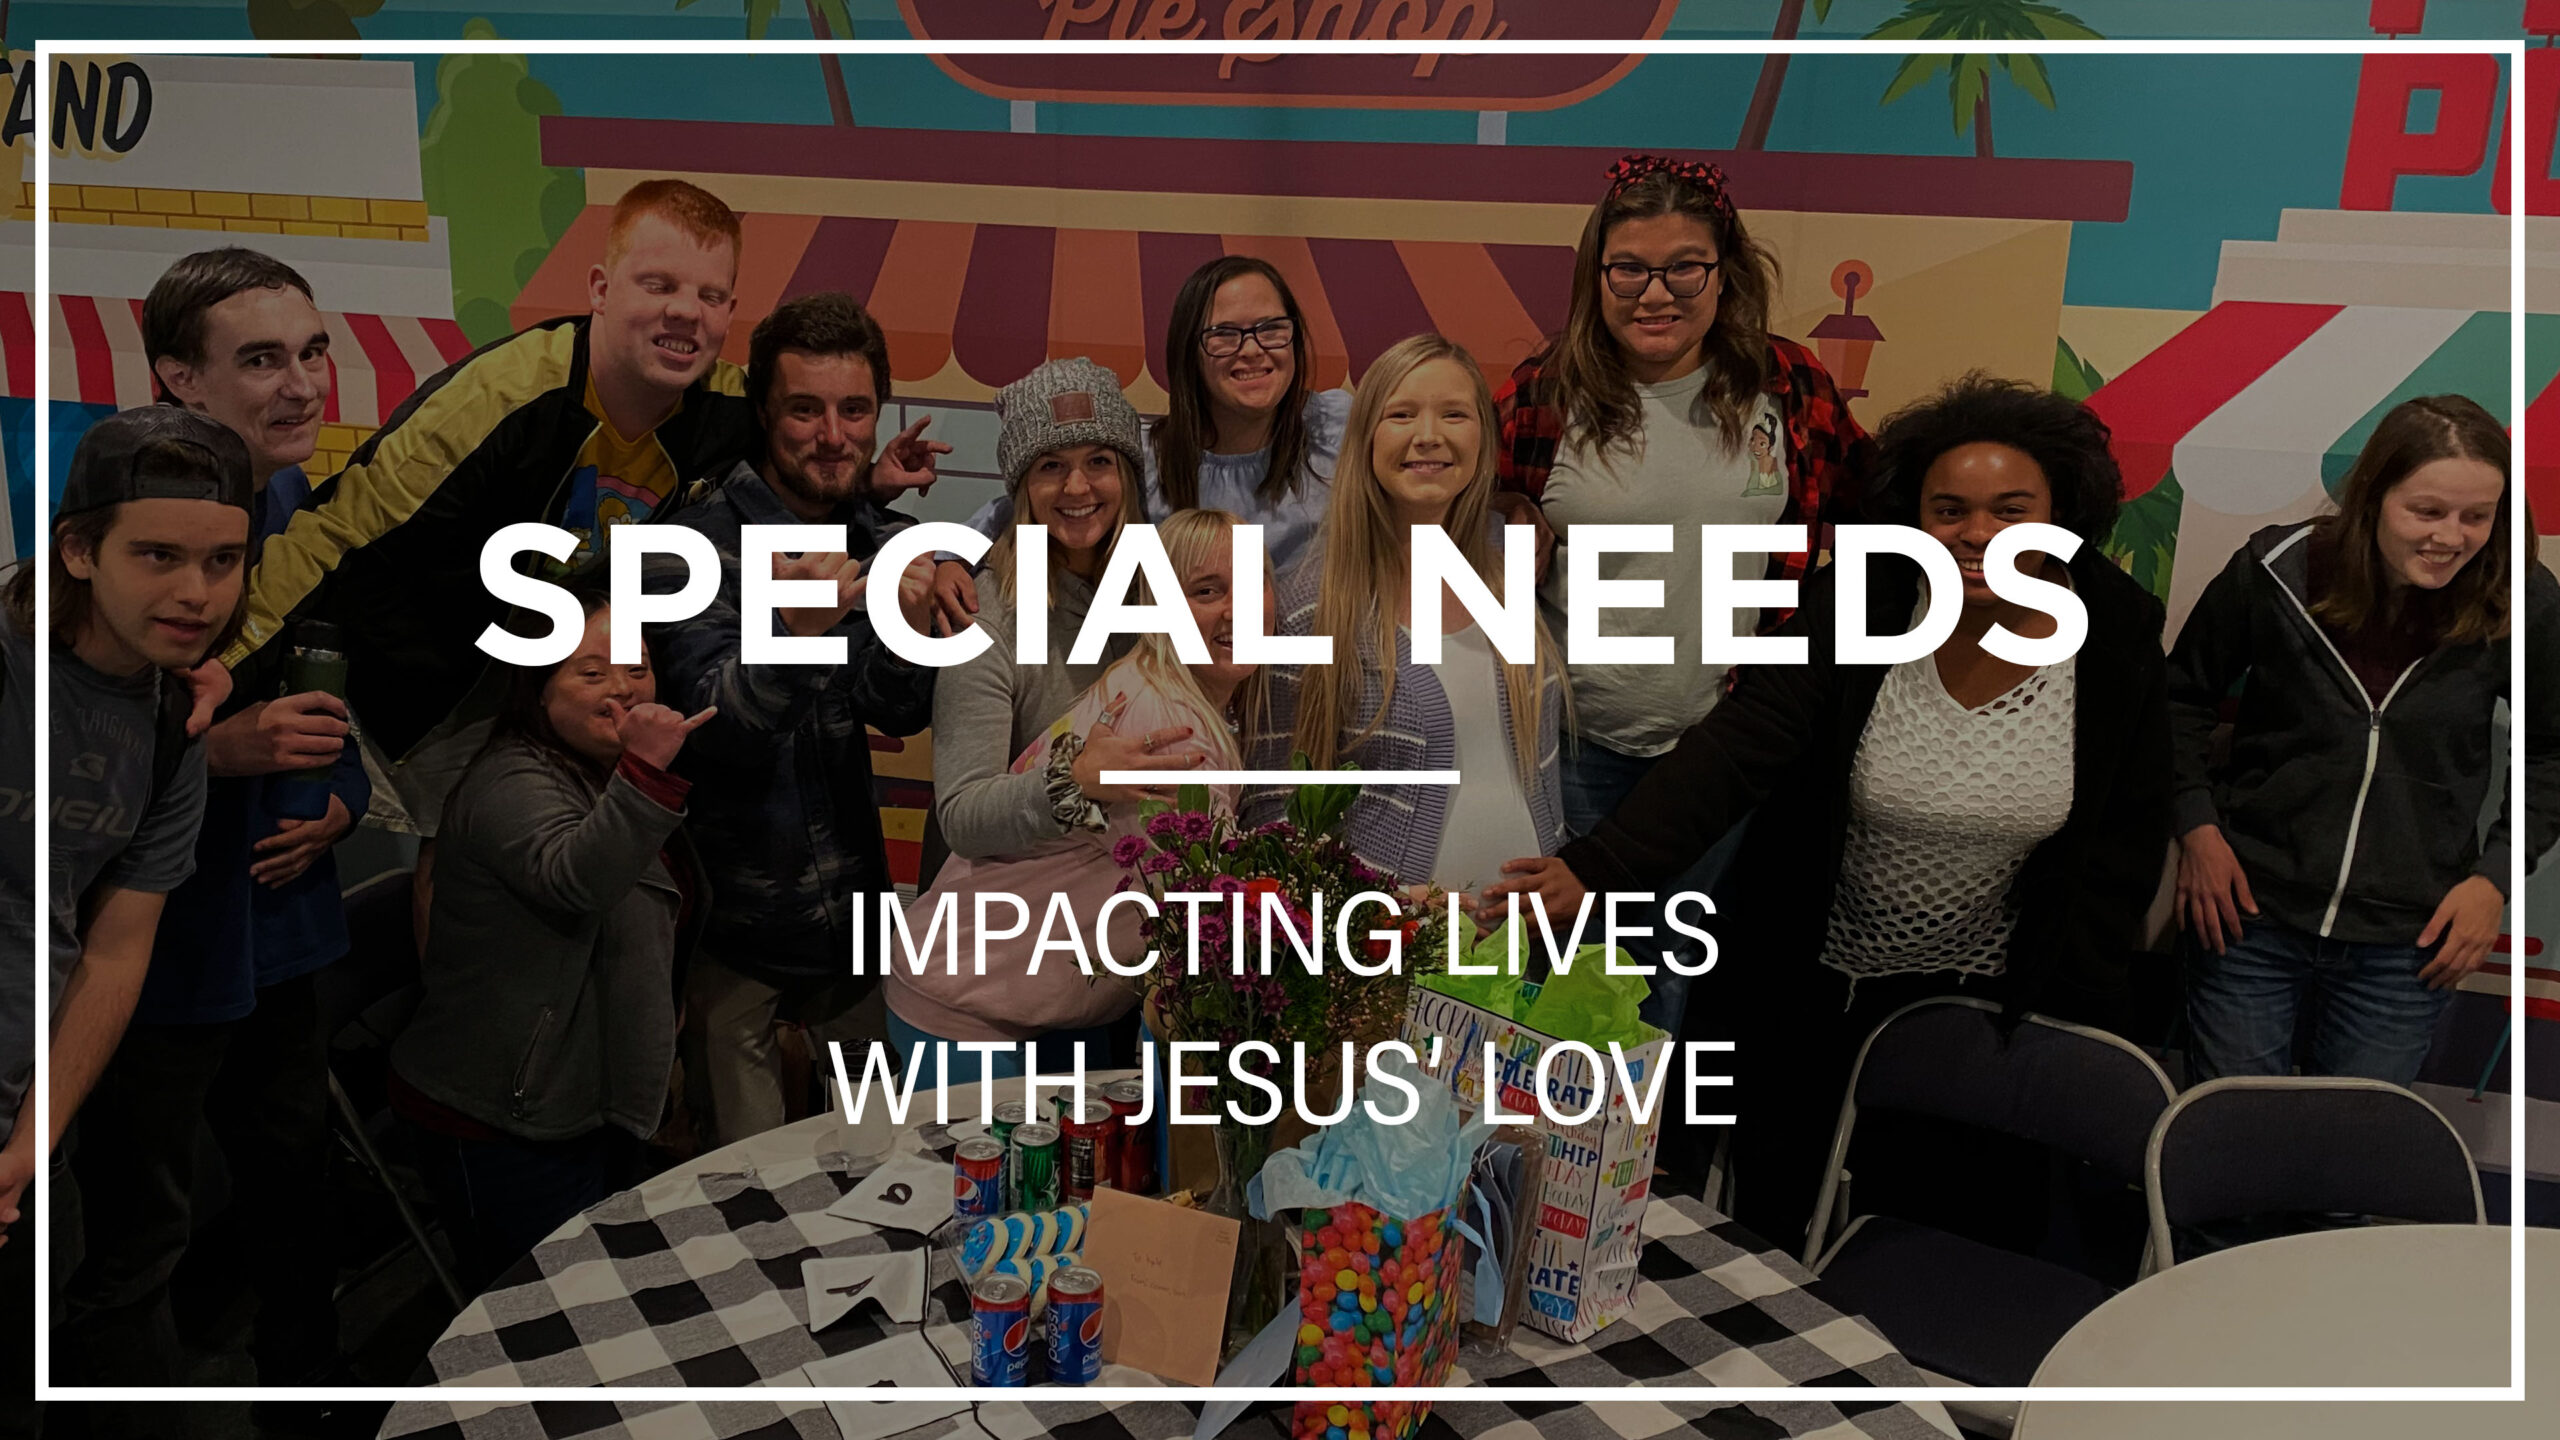 Special Needs Ministry